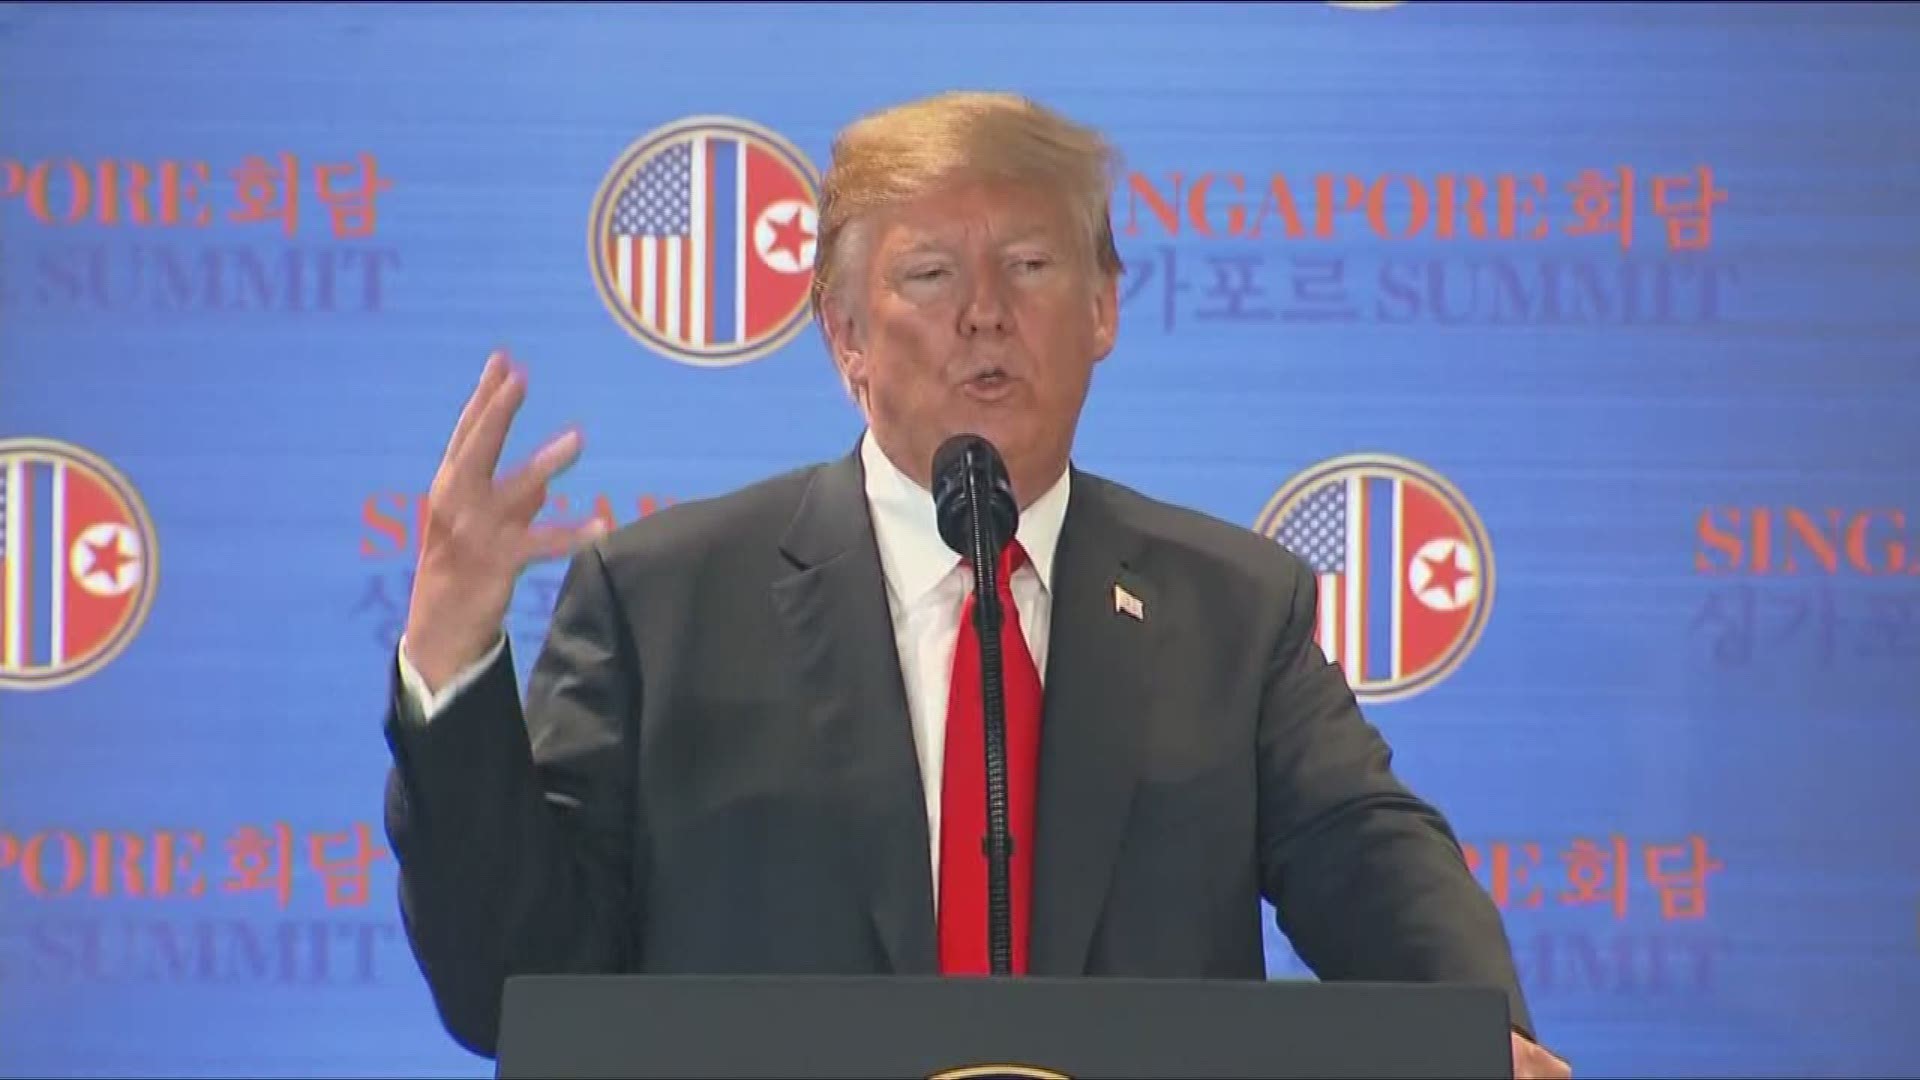 Human rights was briefly discussed during Trump-Kim summit